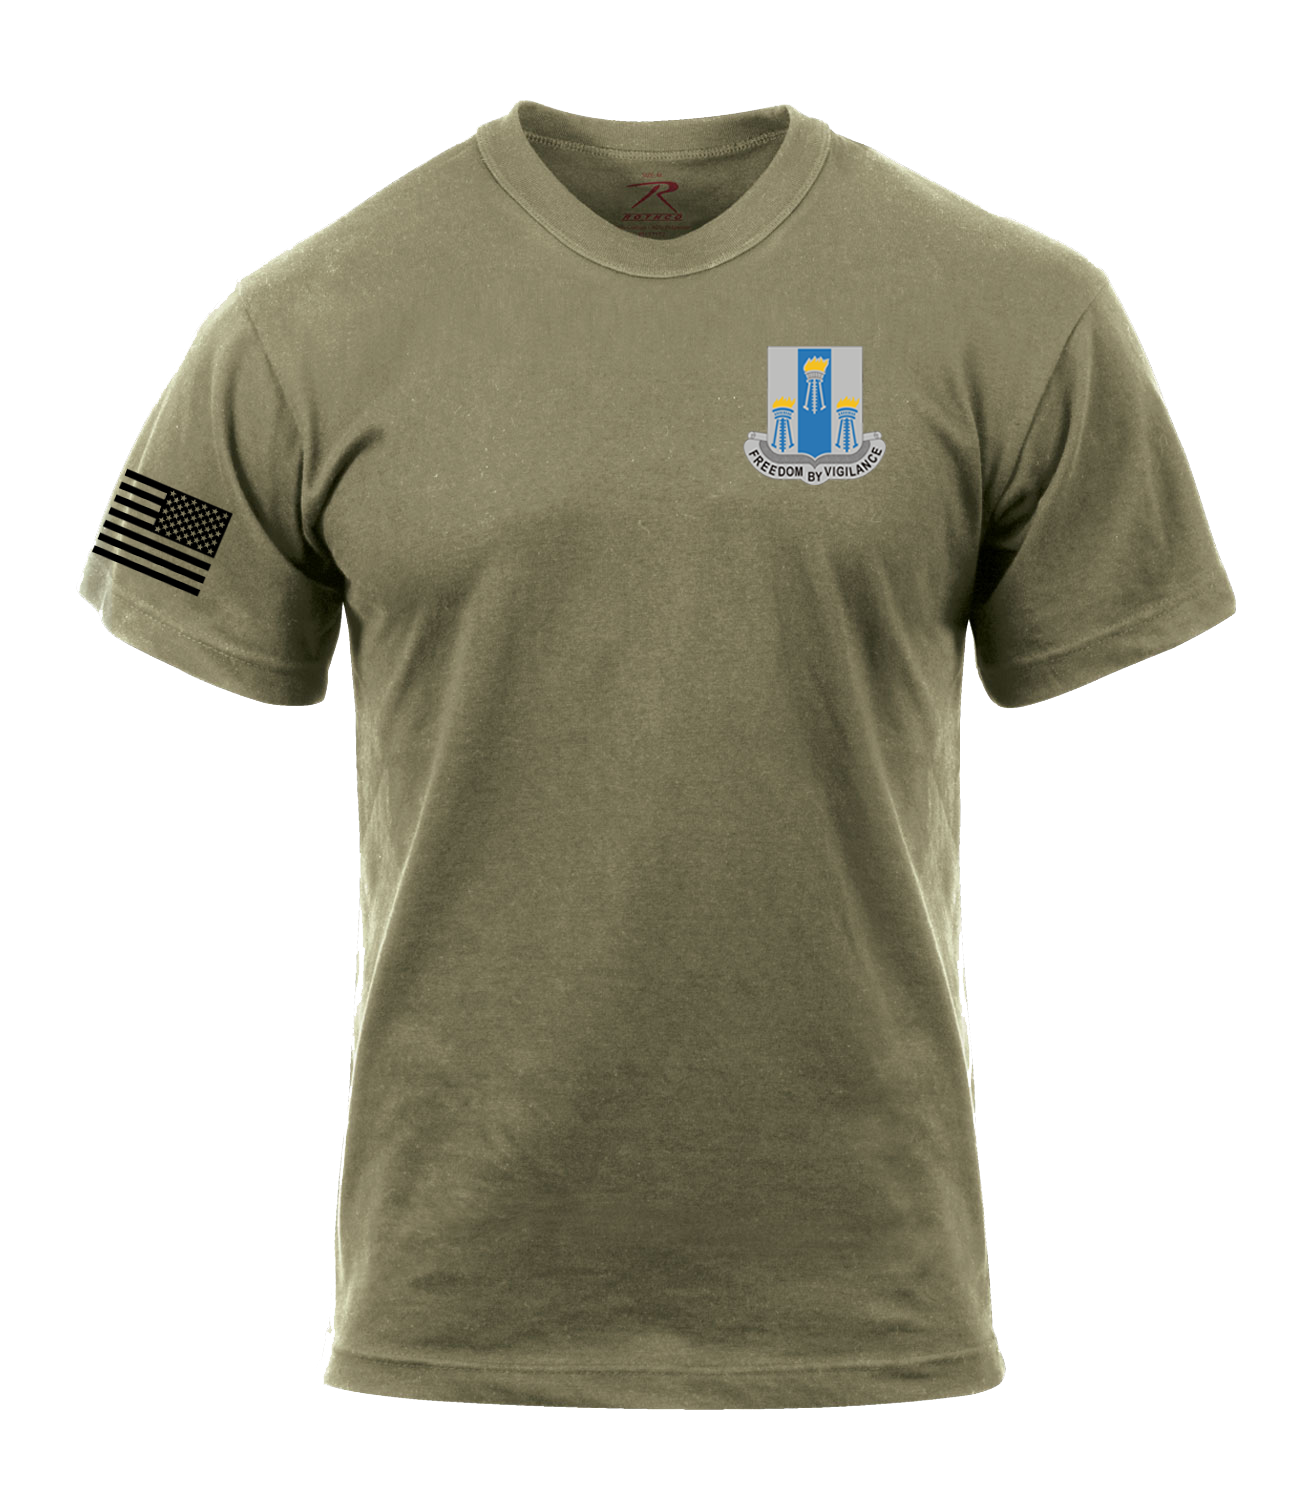 HHD 502d IEW BN AR 670-1 Coyote Brown T-Shirt – Warrior Society